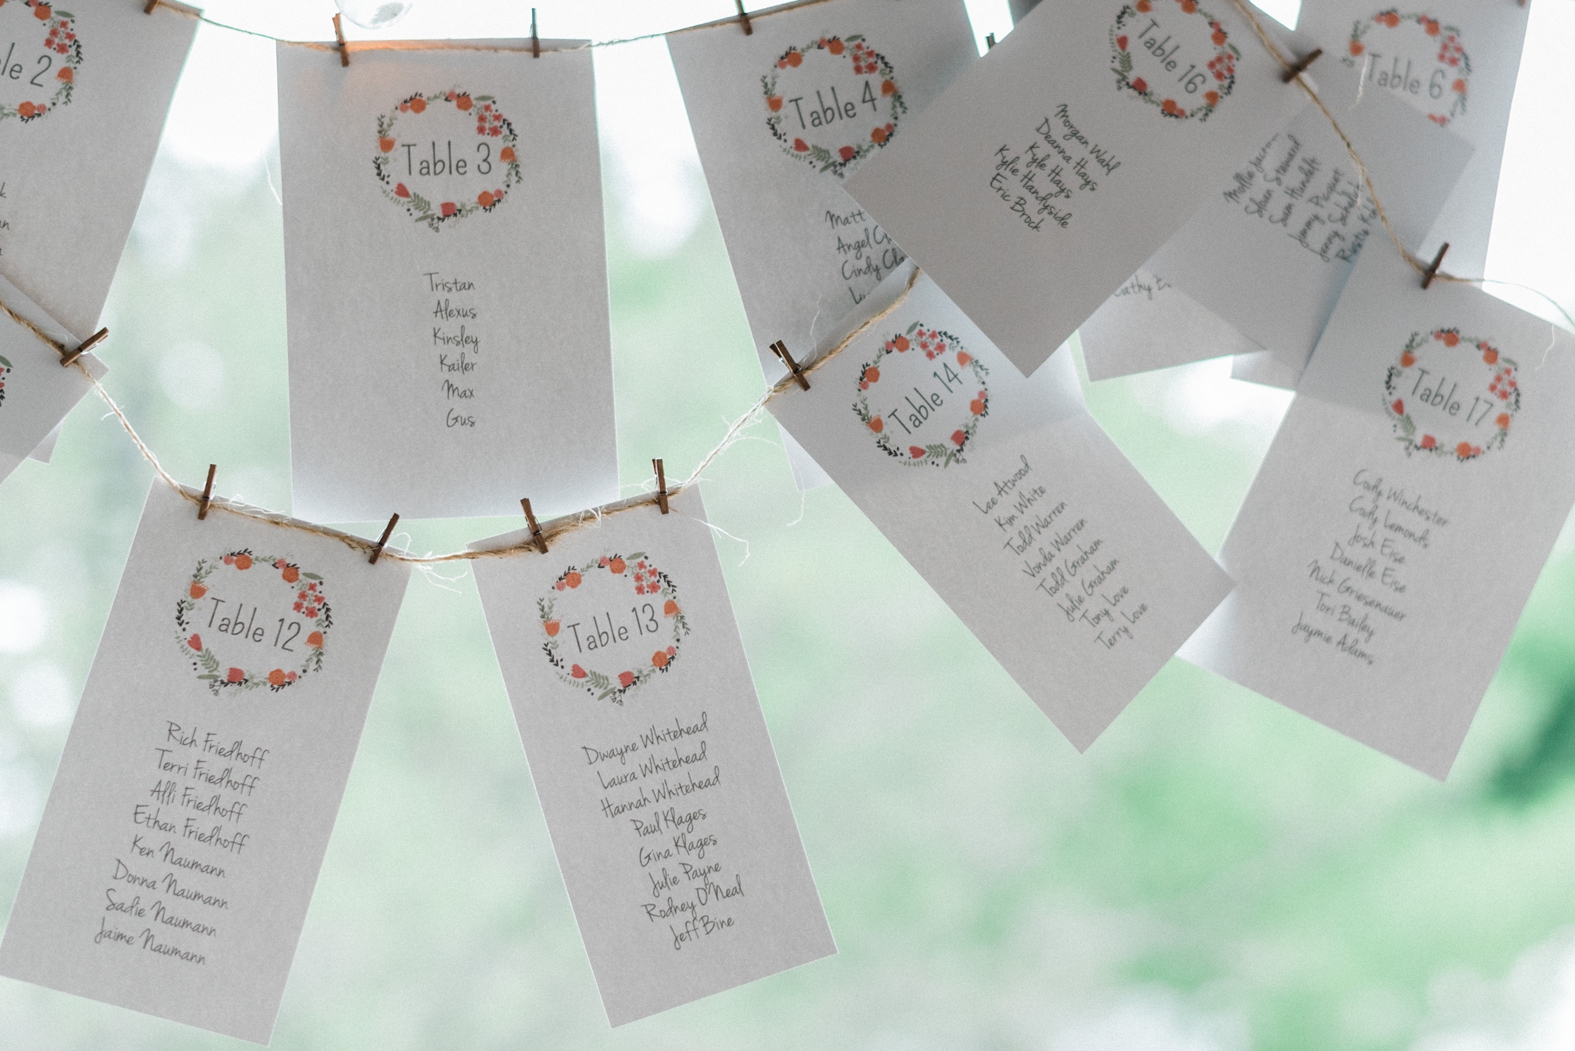 Wedding seating chart on cardstock hanging by twine.